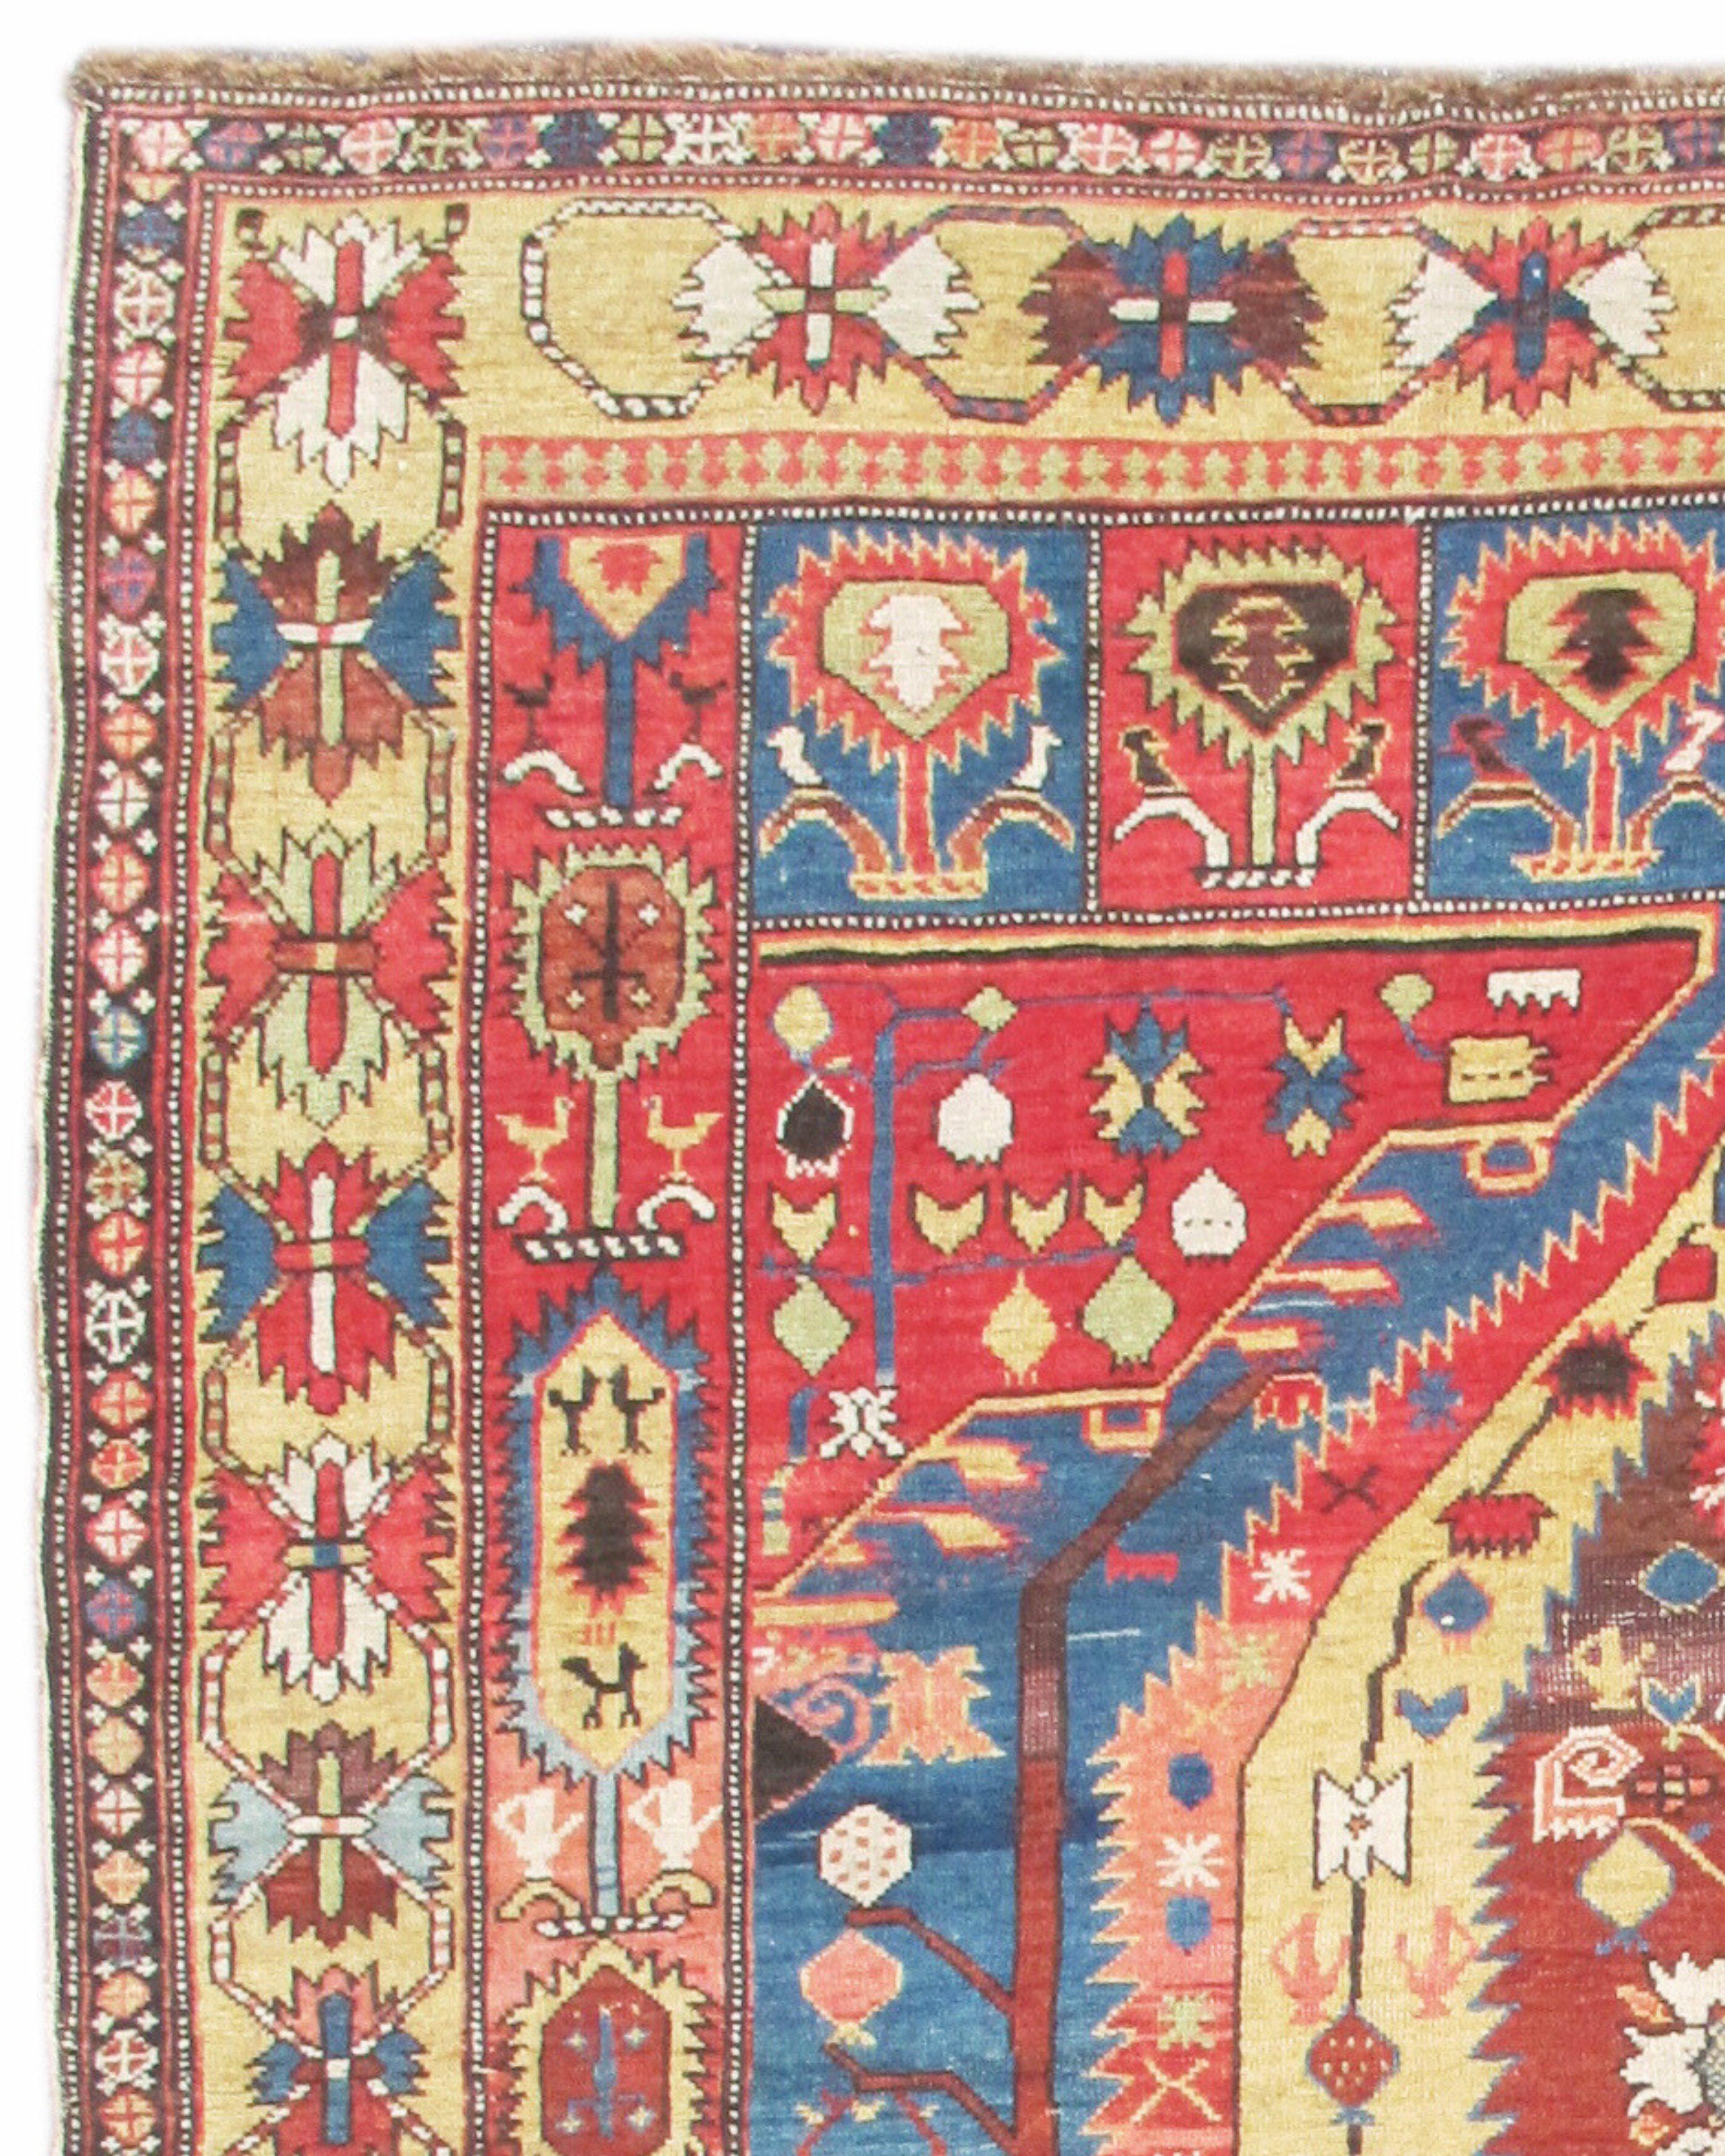 Antique Caucasian Blue and Red Shirvan Rug, c. 1900 In Excellent Condition For Sale In San Francisco, CA